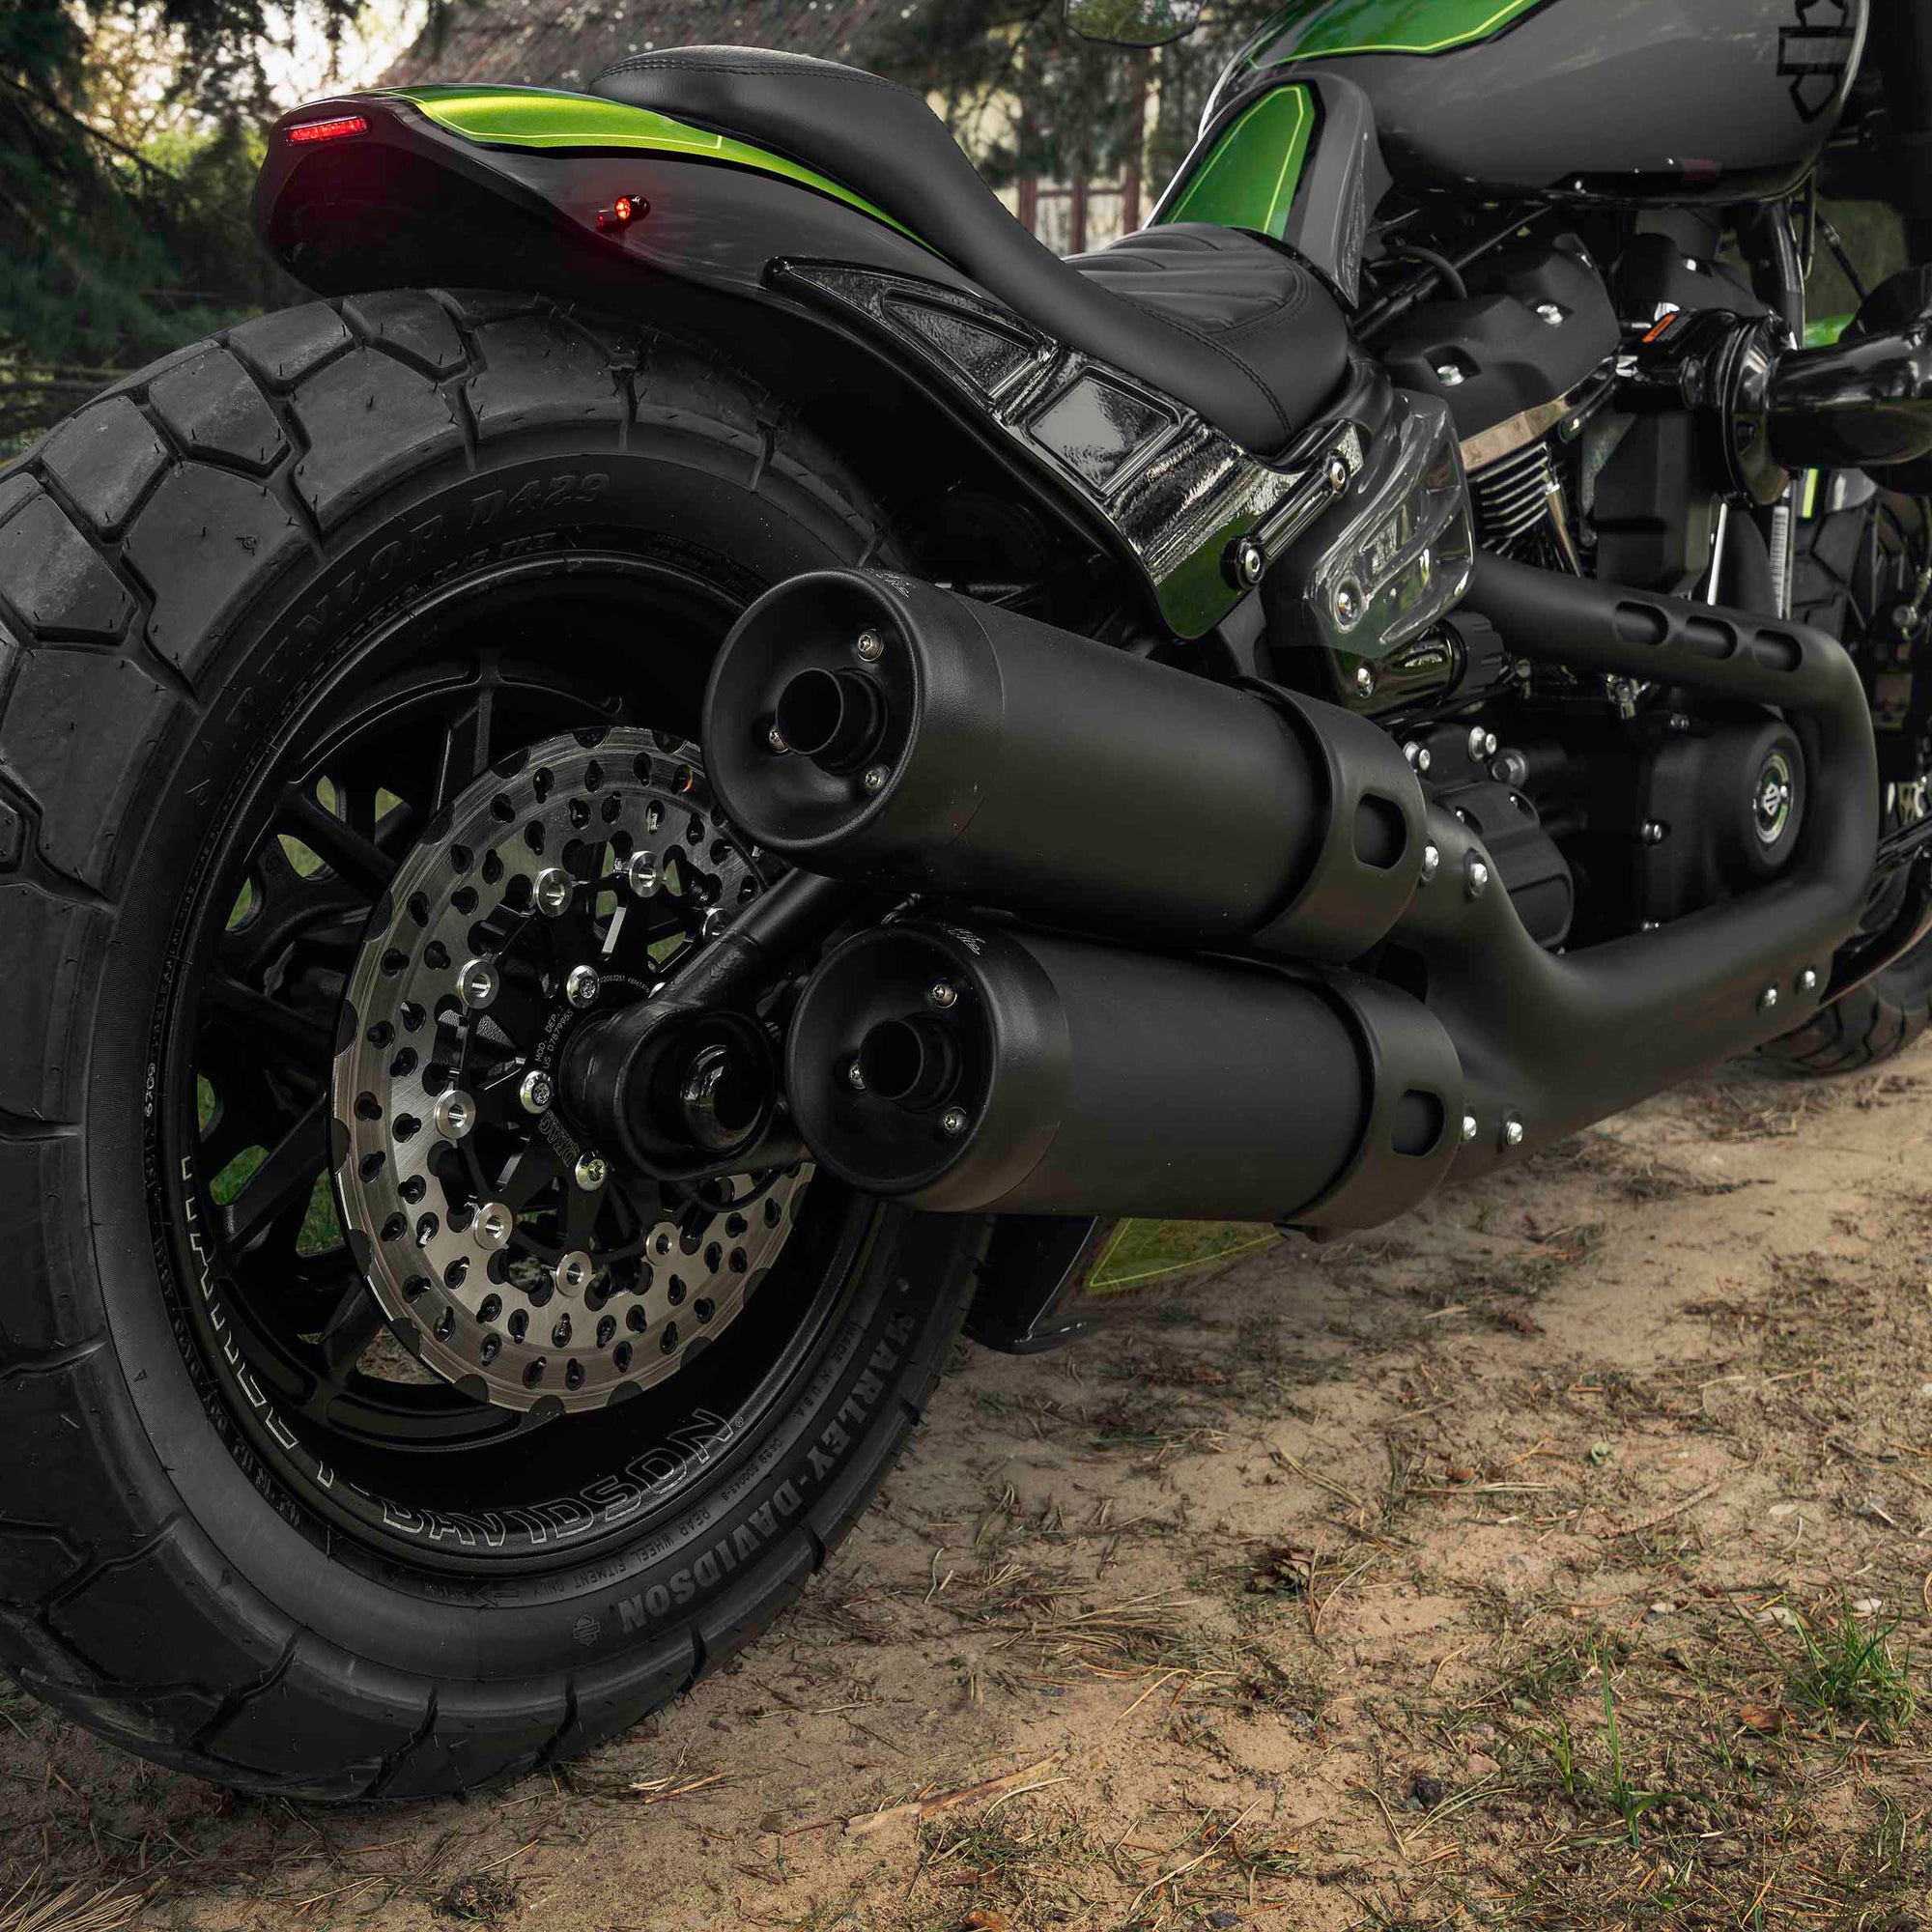 Zoomed Harley Davidson Fat Bob motorcycle with Killer Custom parts from the rear in a nature environment